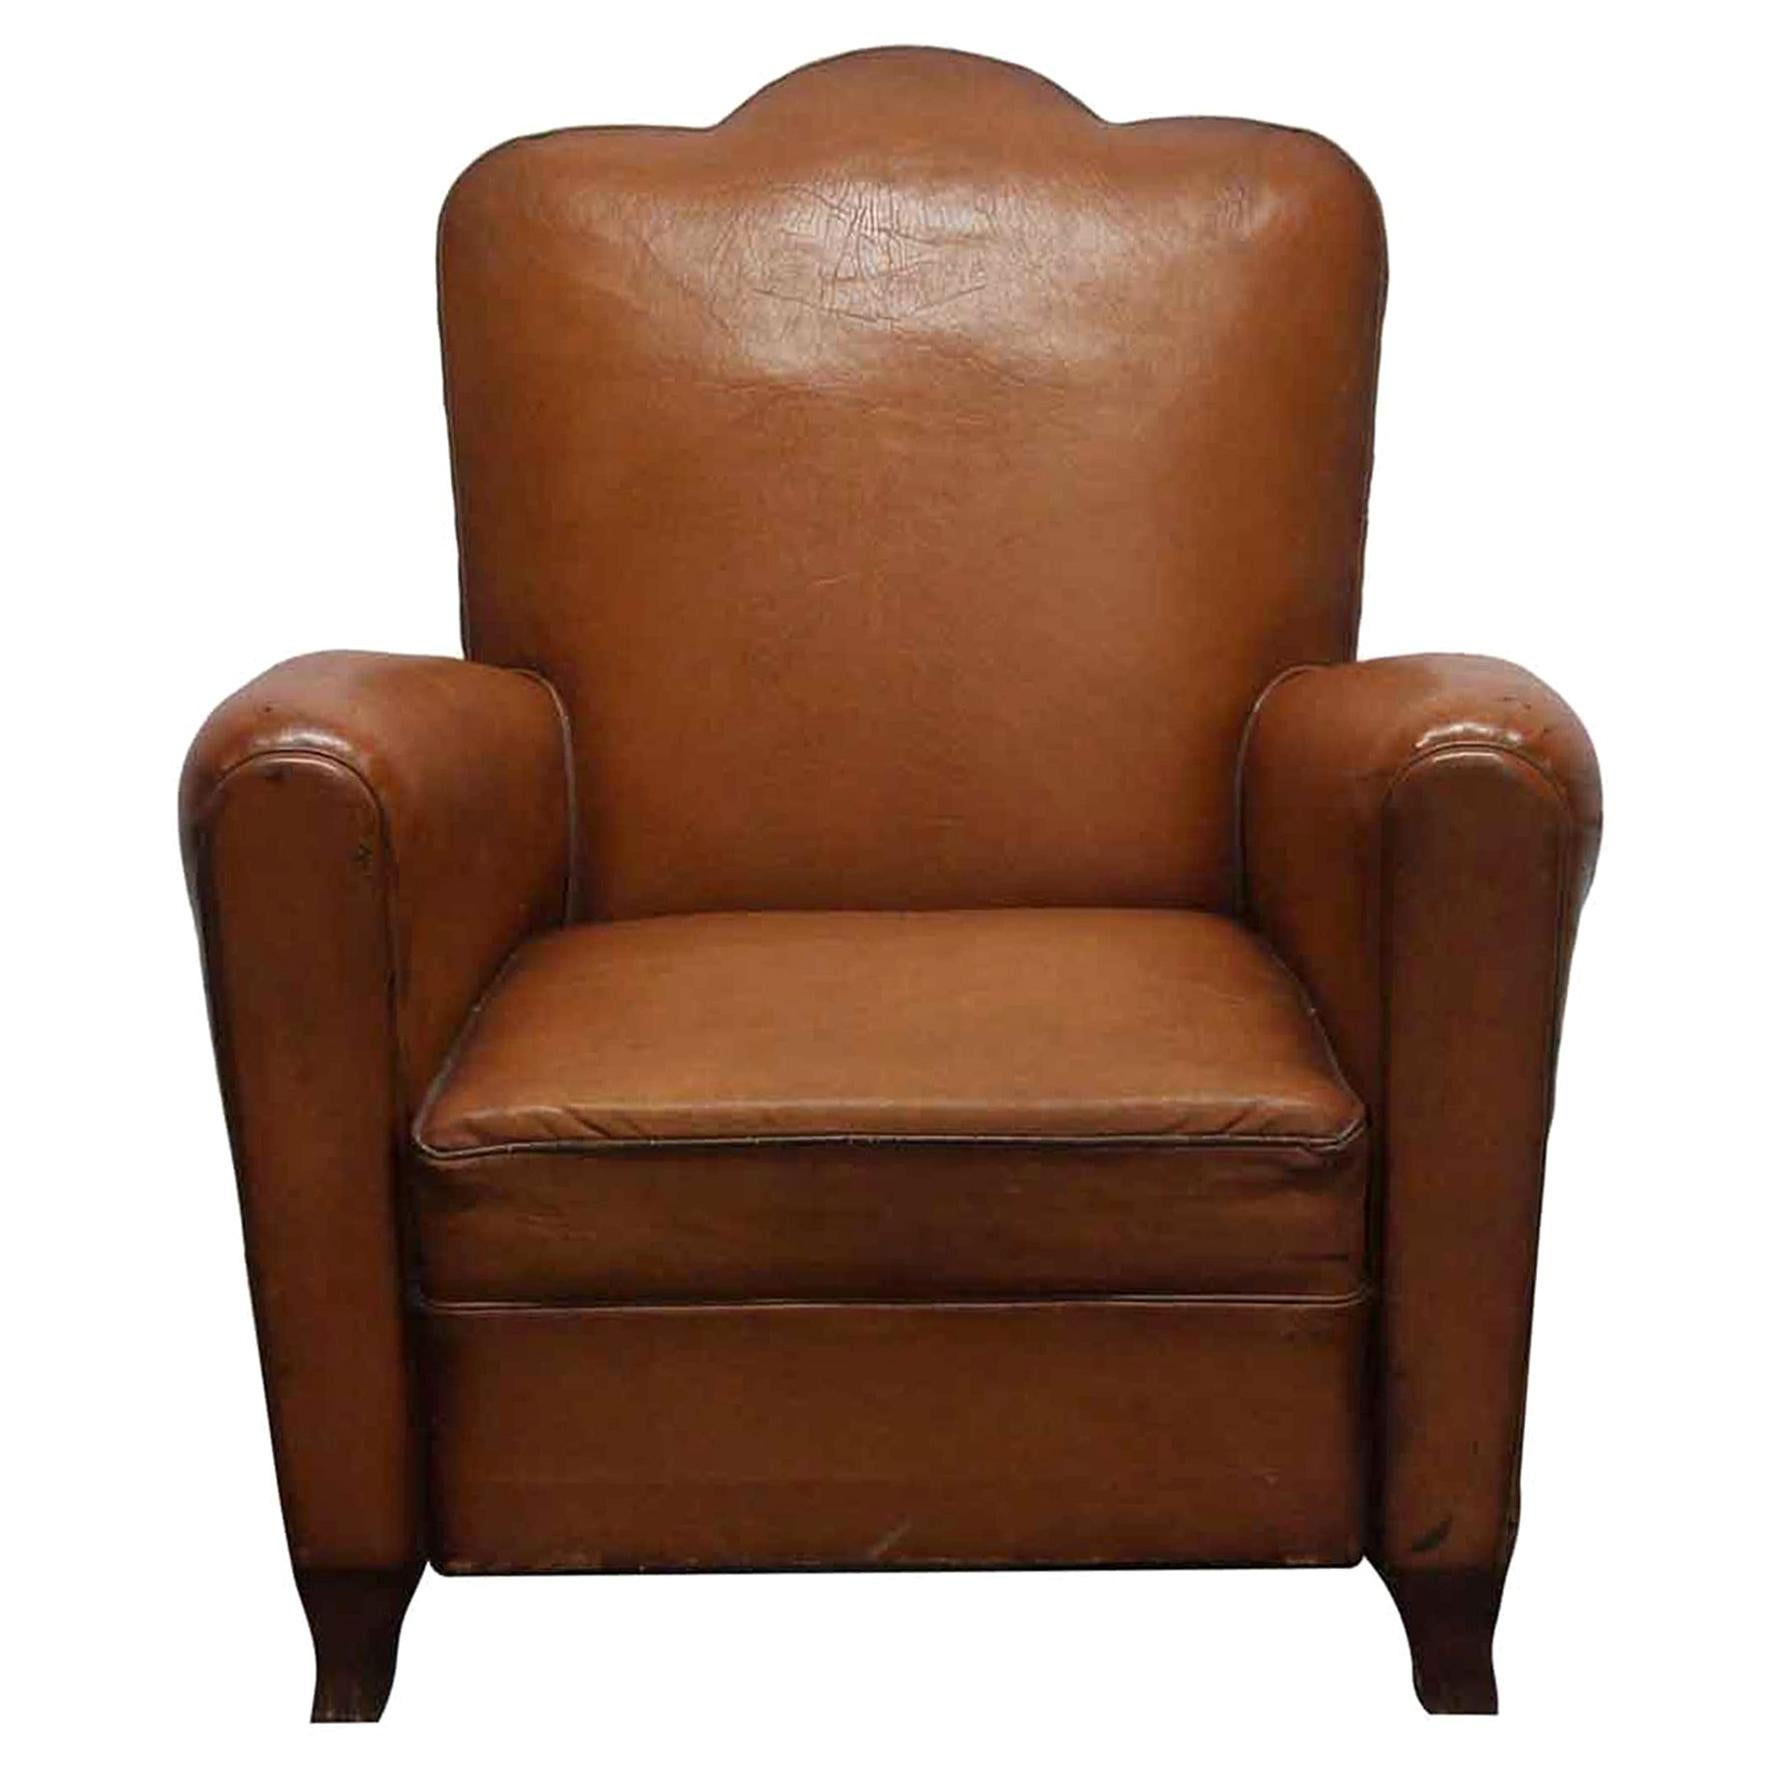 1960s French Brown Leather Club Chair, Studded back and Wooden Feet